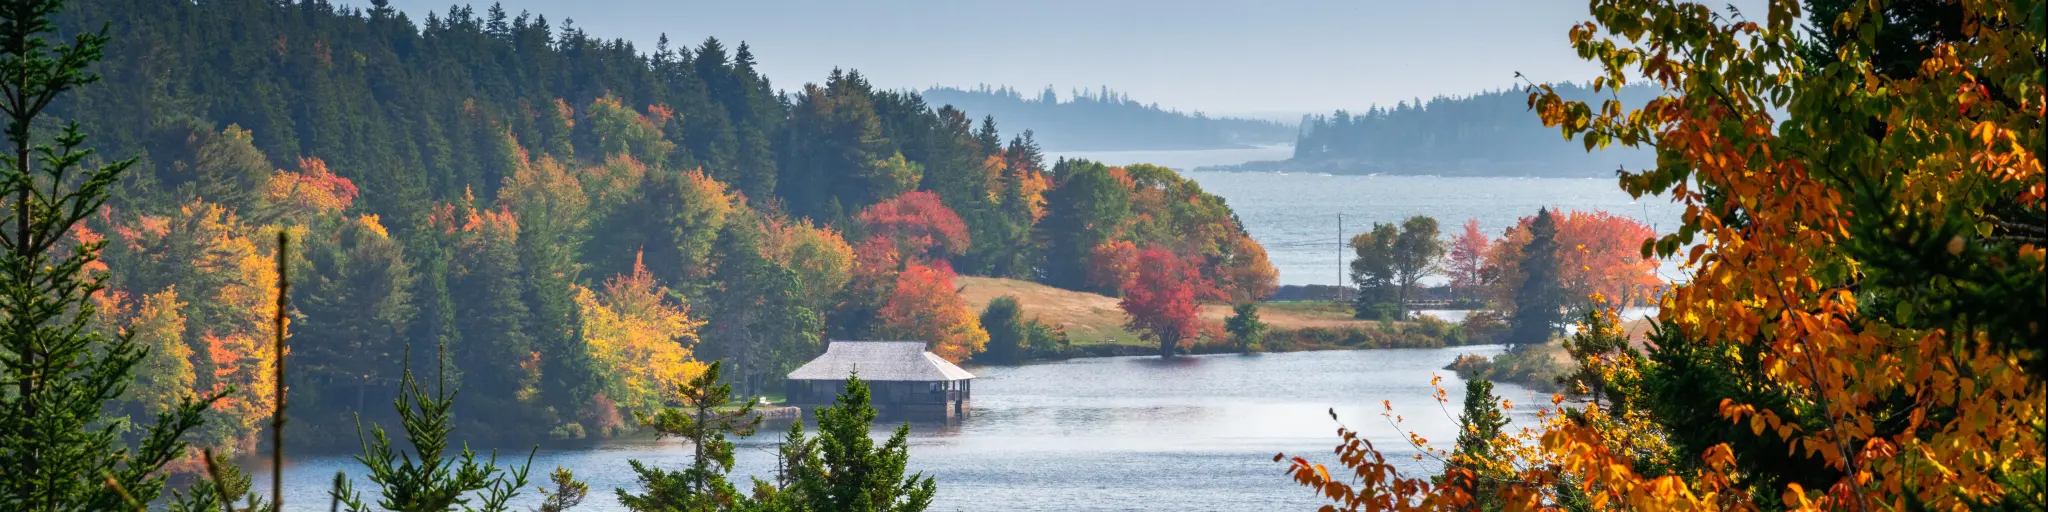 The ocean as seen through fall foliage at Acadia National Park in Maine, with a wooden hut on a jetty 